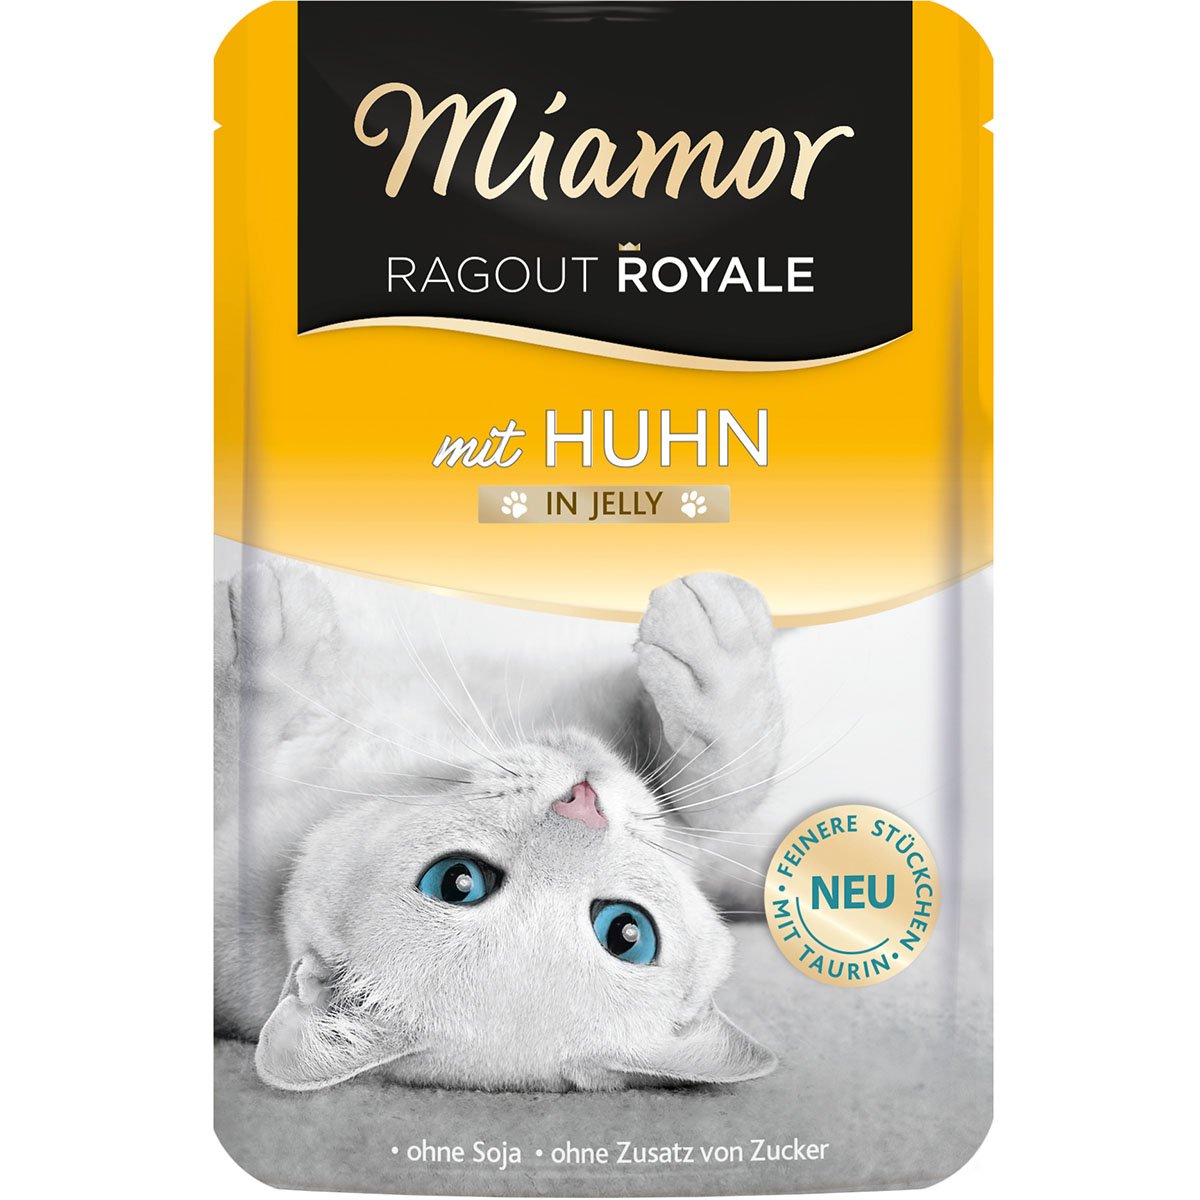 Miamor Ragout Royale Huhn in Jelly 22x100g